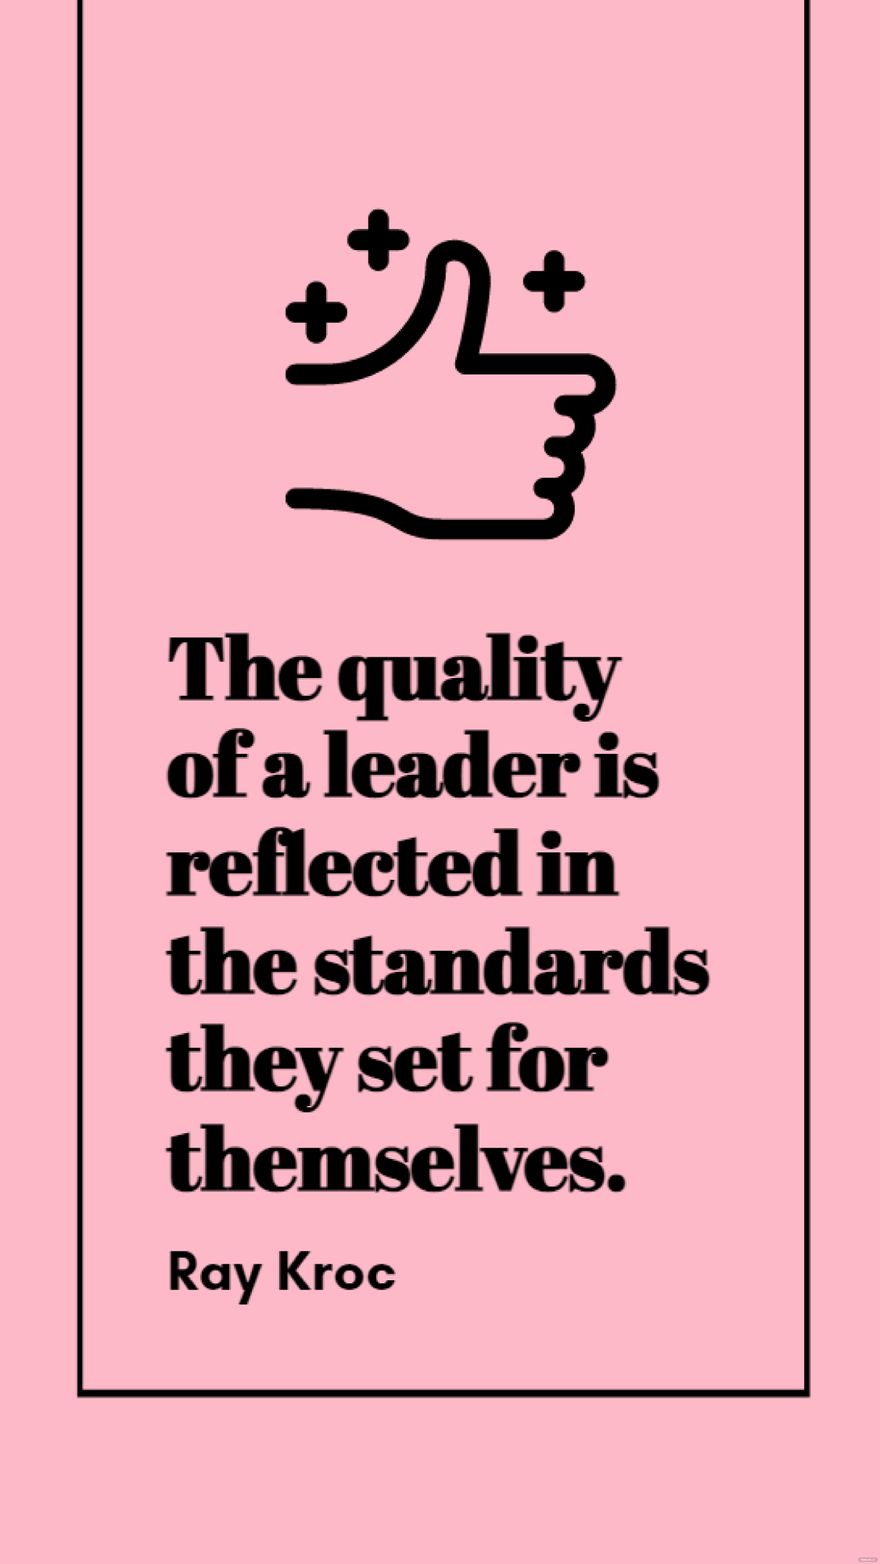 Free Ray Kroc - The quality of a leader is reflected in the standards they set for themselves.